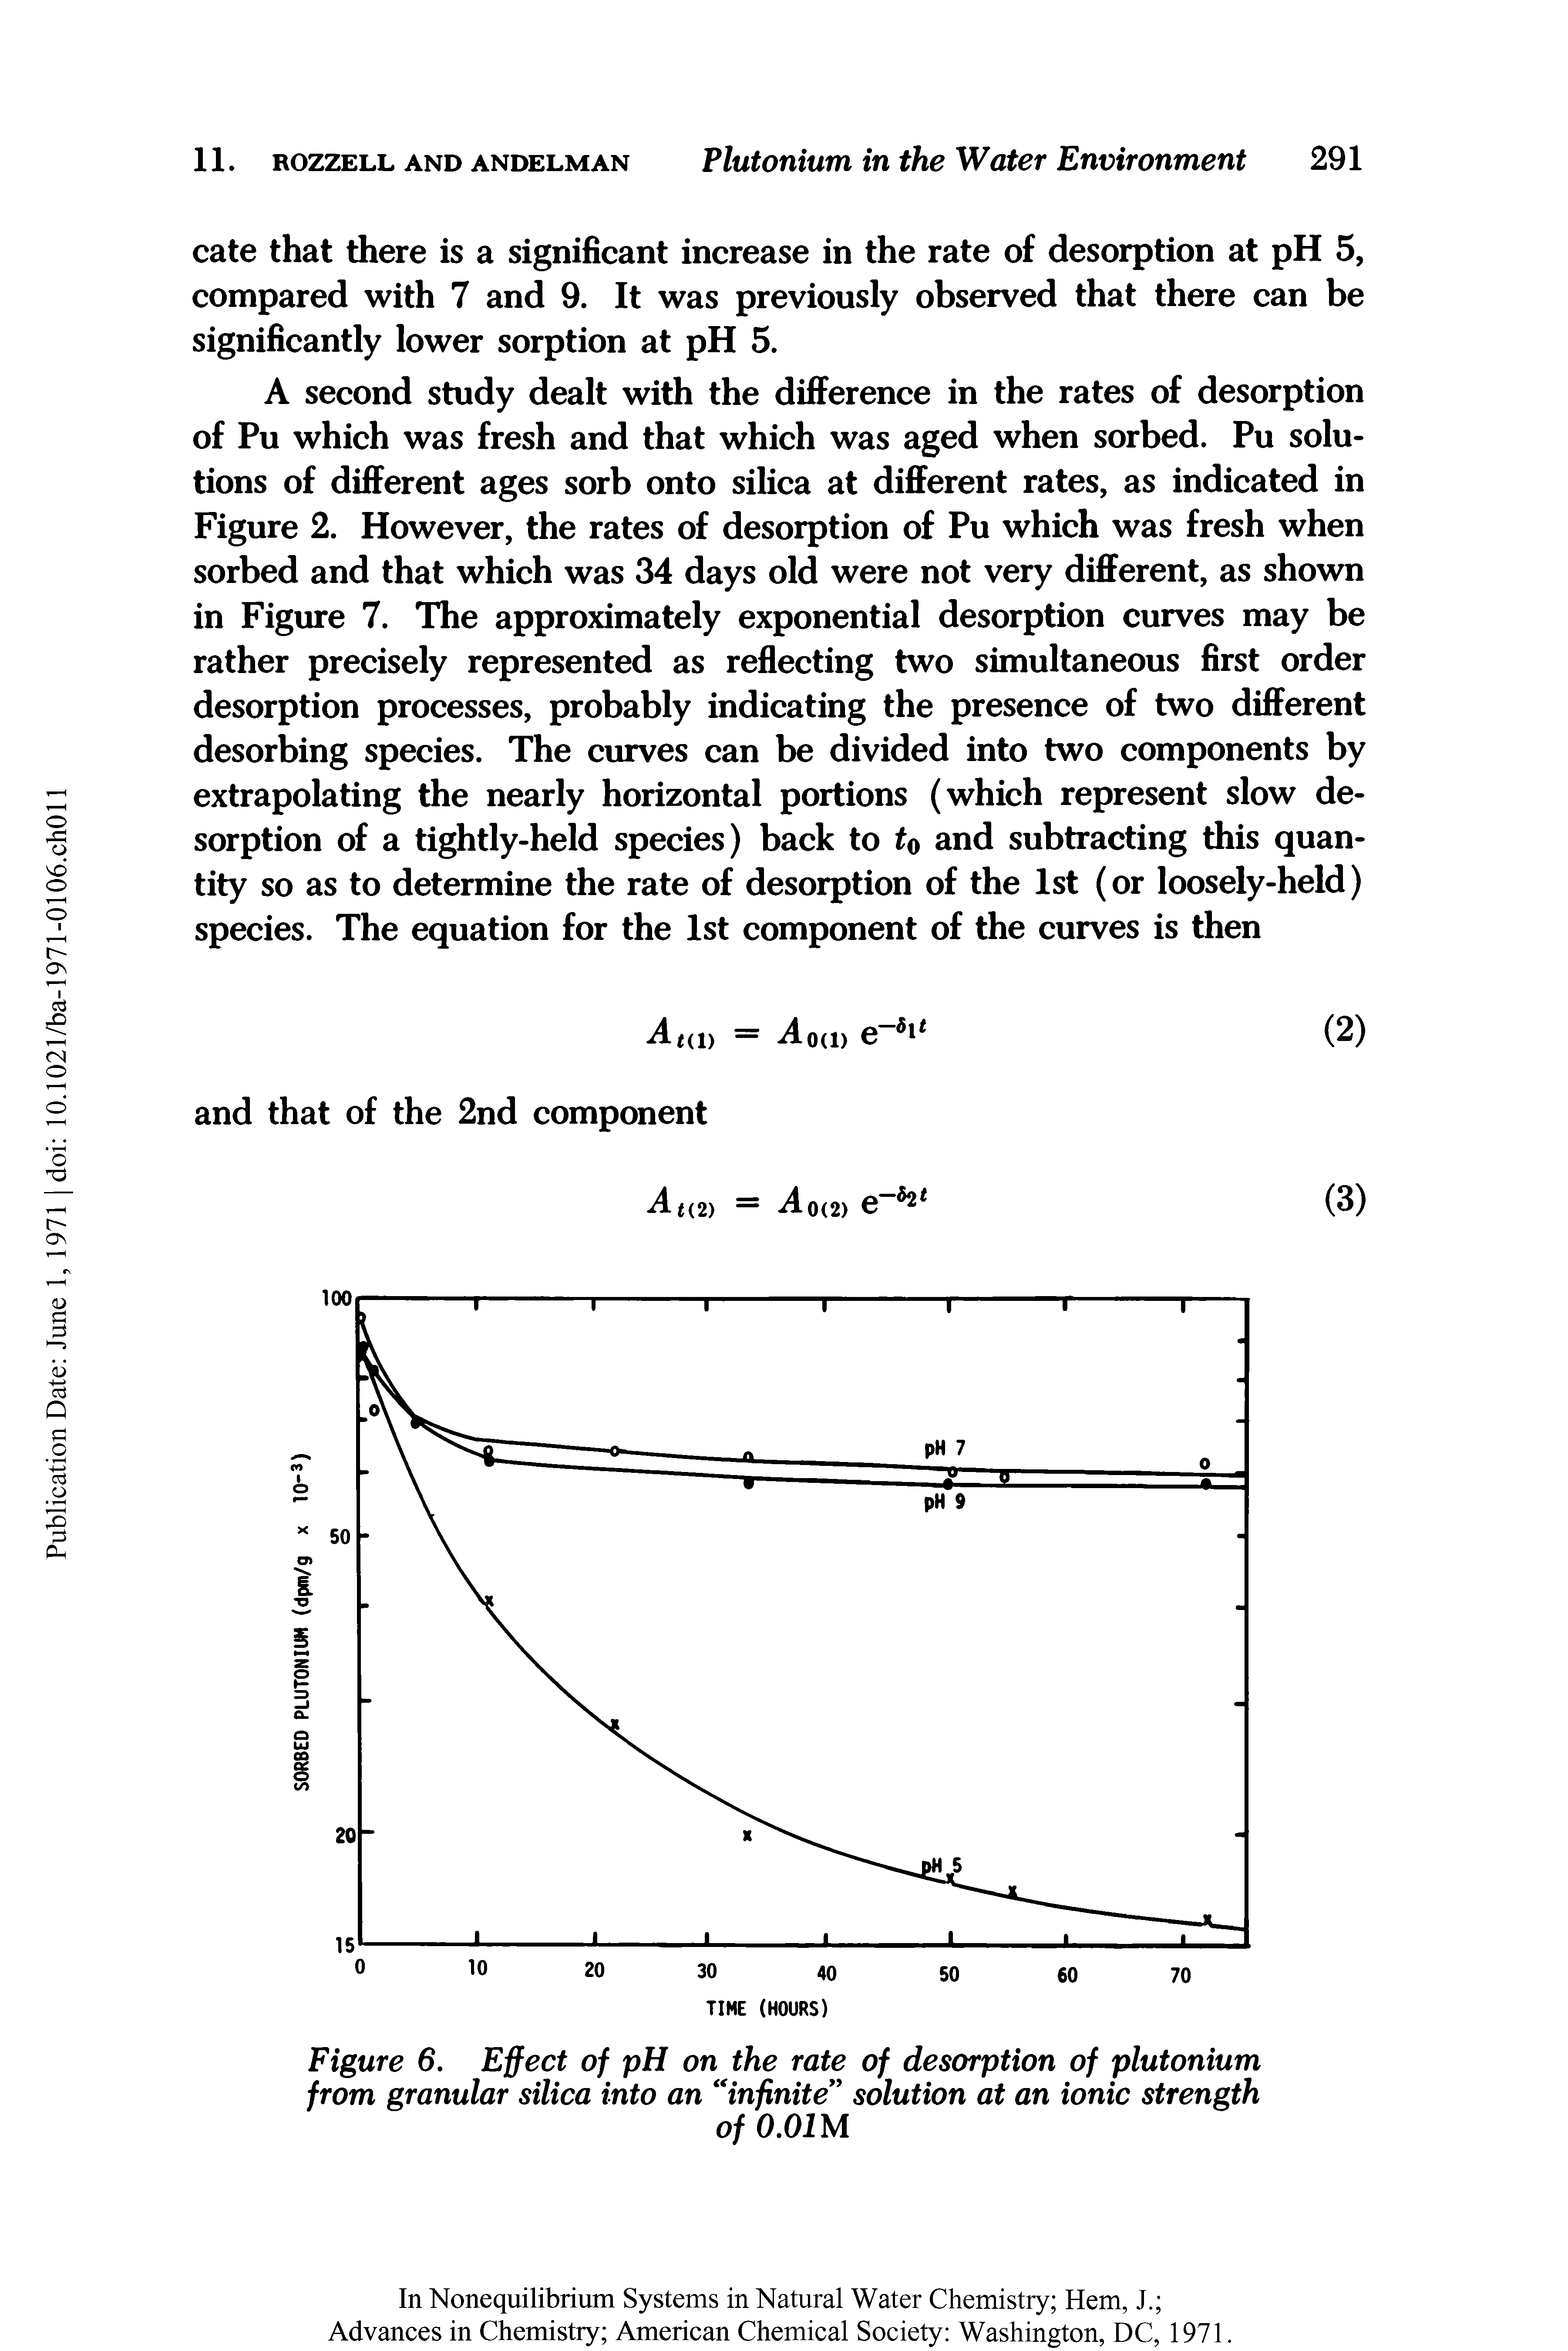 Figure 6. Effect of pH on the rate of desorption of plutonium from granular silica into an infinite solution at an ionic strength...